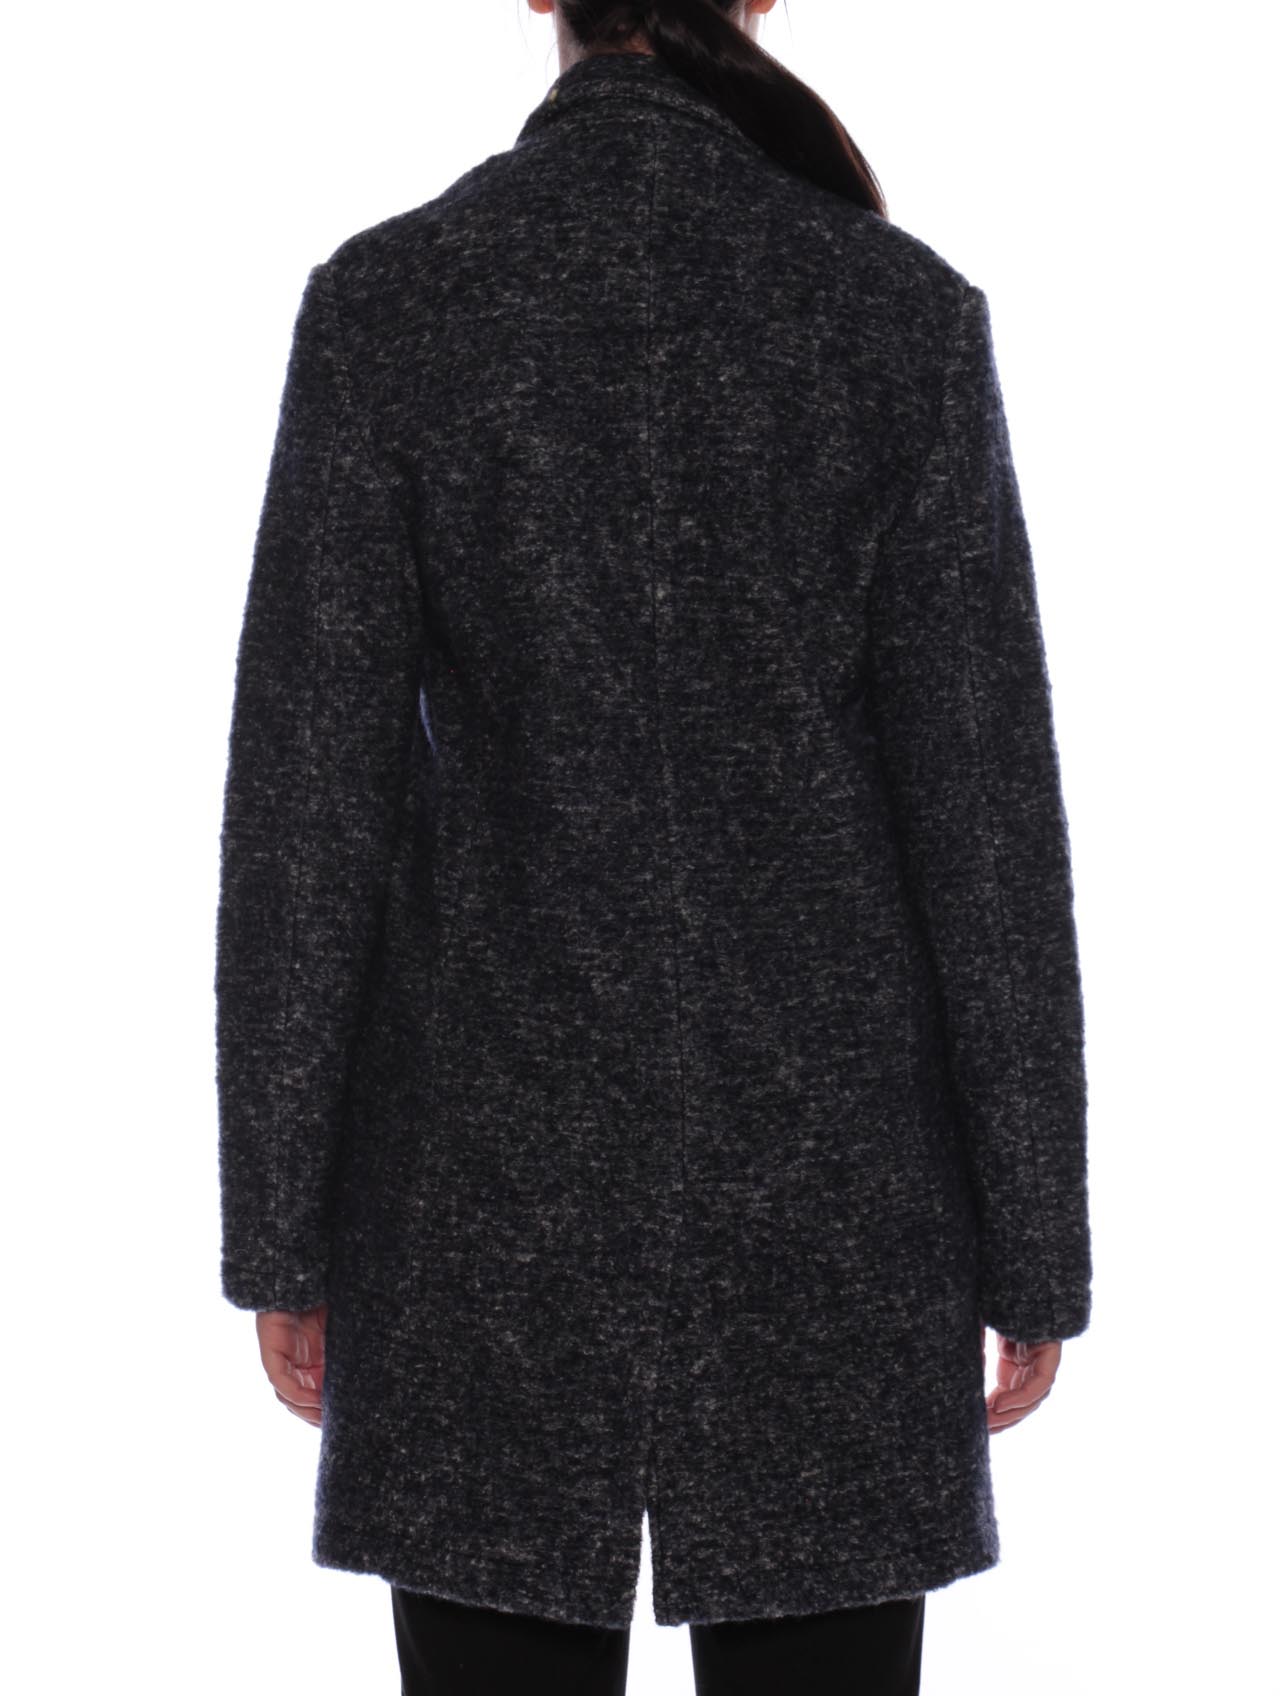 Wool & Co., Cappotto